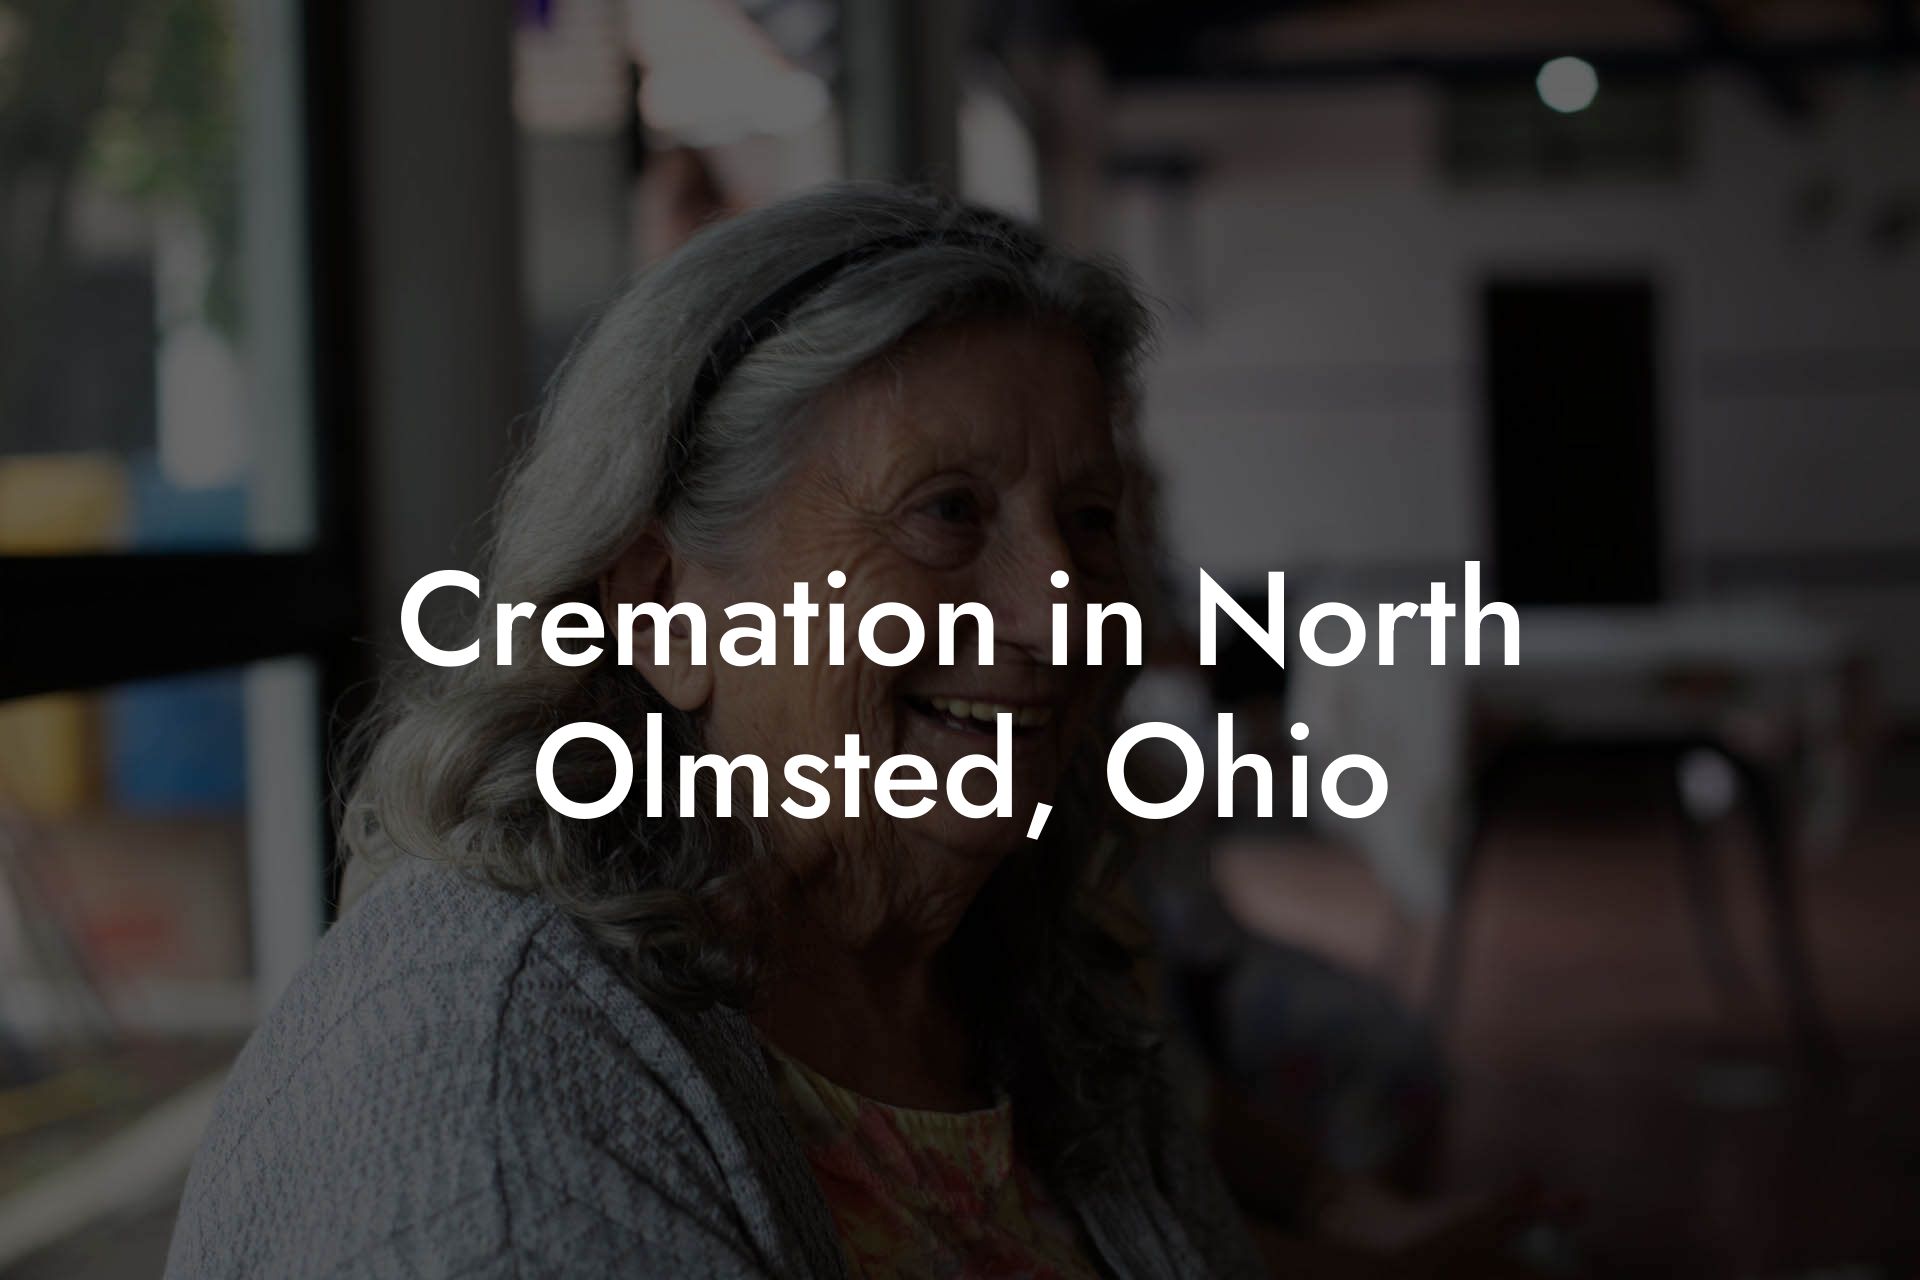 Cremation in North Olmsted, Ohio